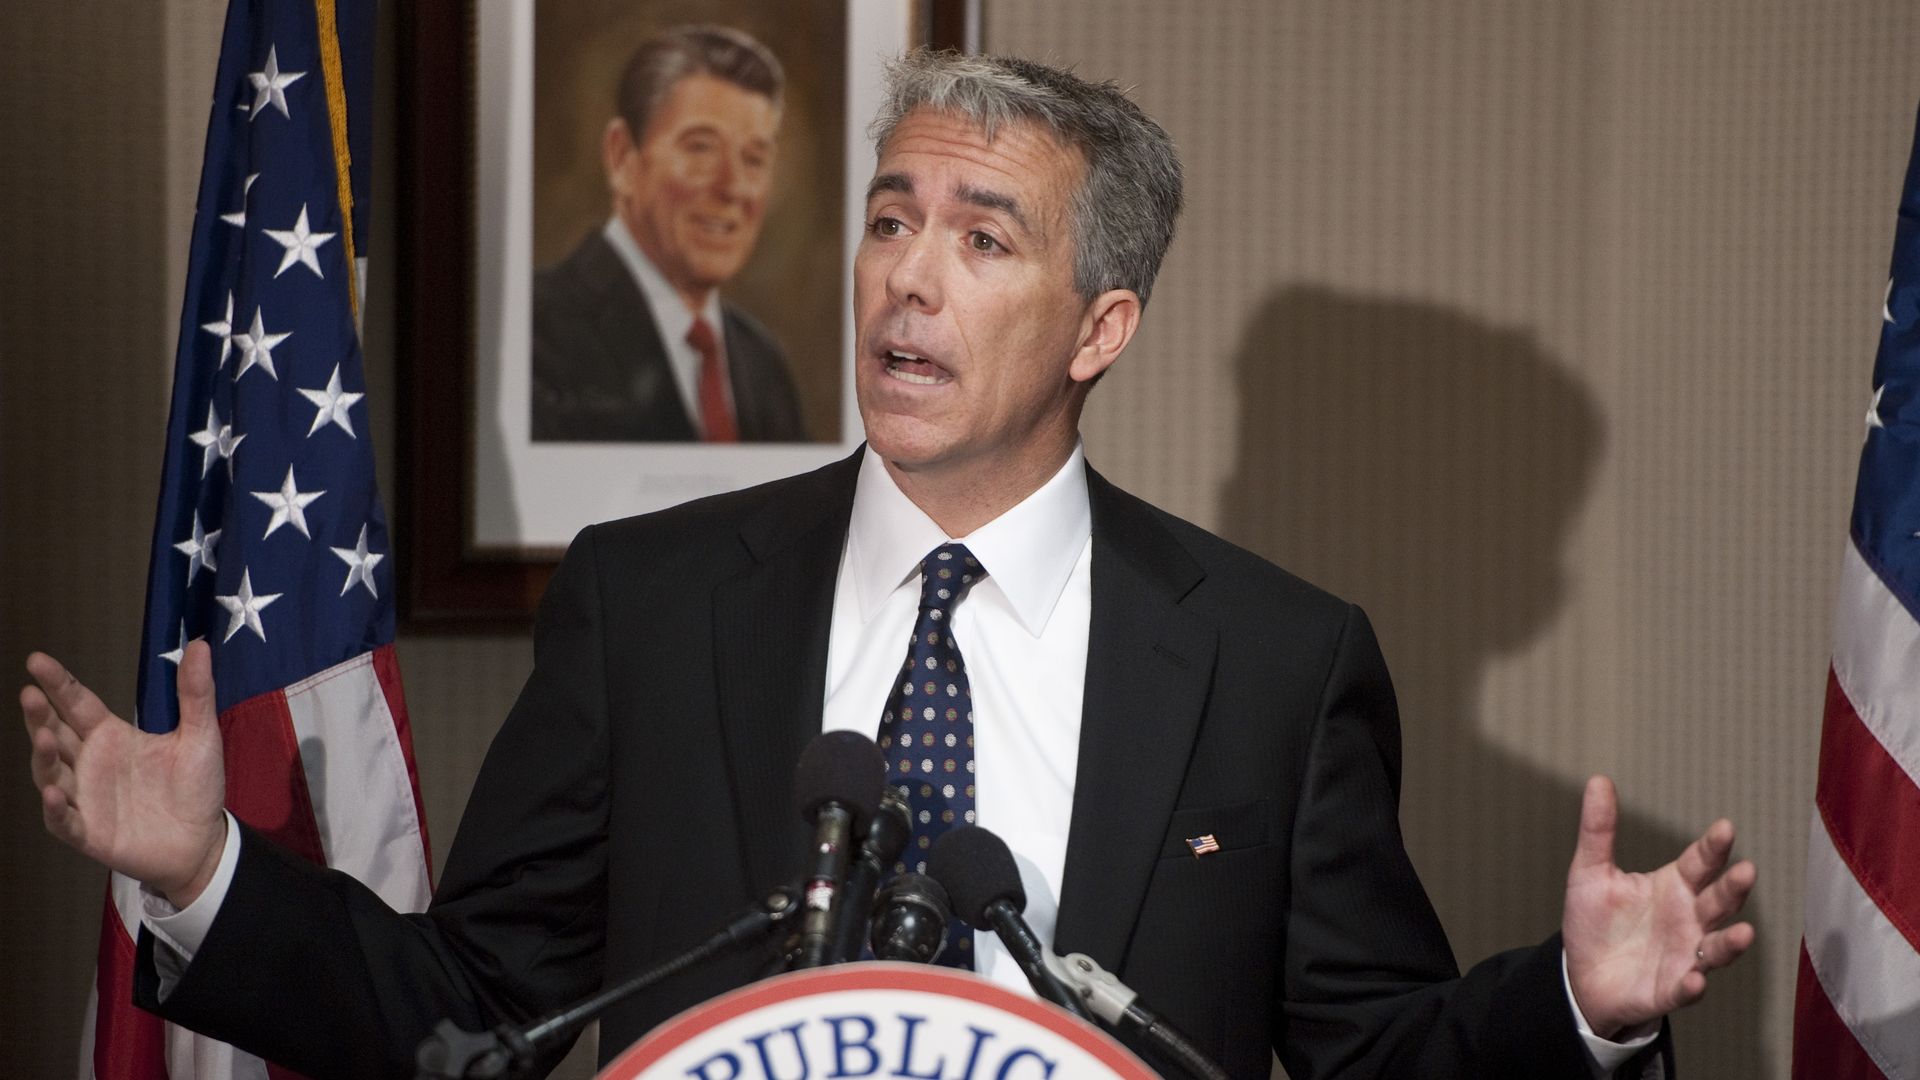 Joe Walsh, R-Ill., holds a news conference on his election to Congress at the Republican National Committee headquarters on Wednesday, Nov. 17, 2010